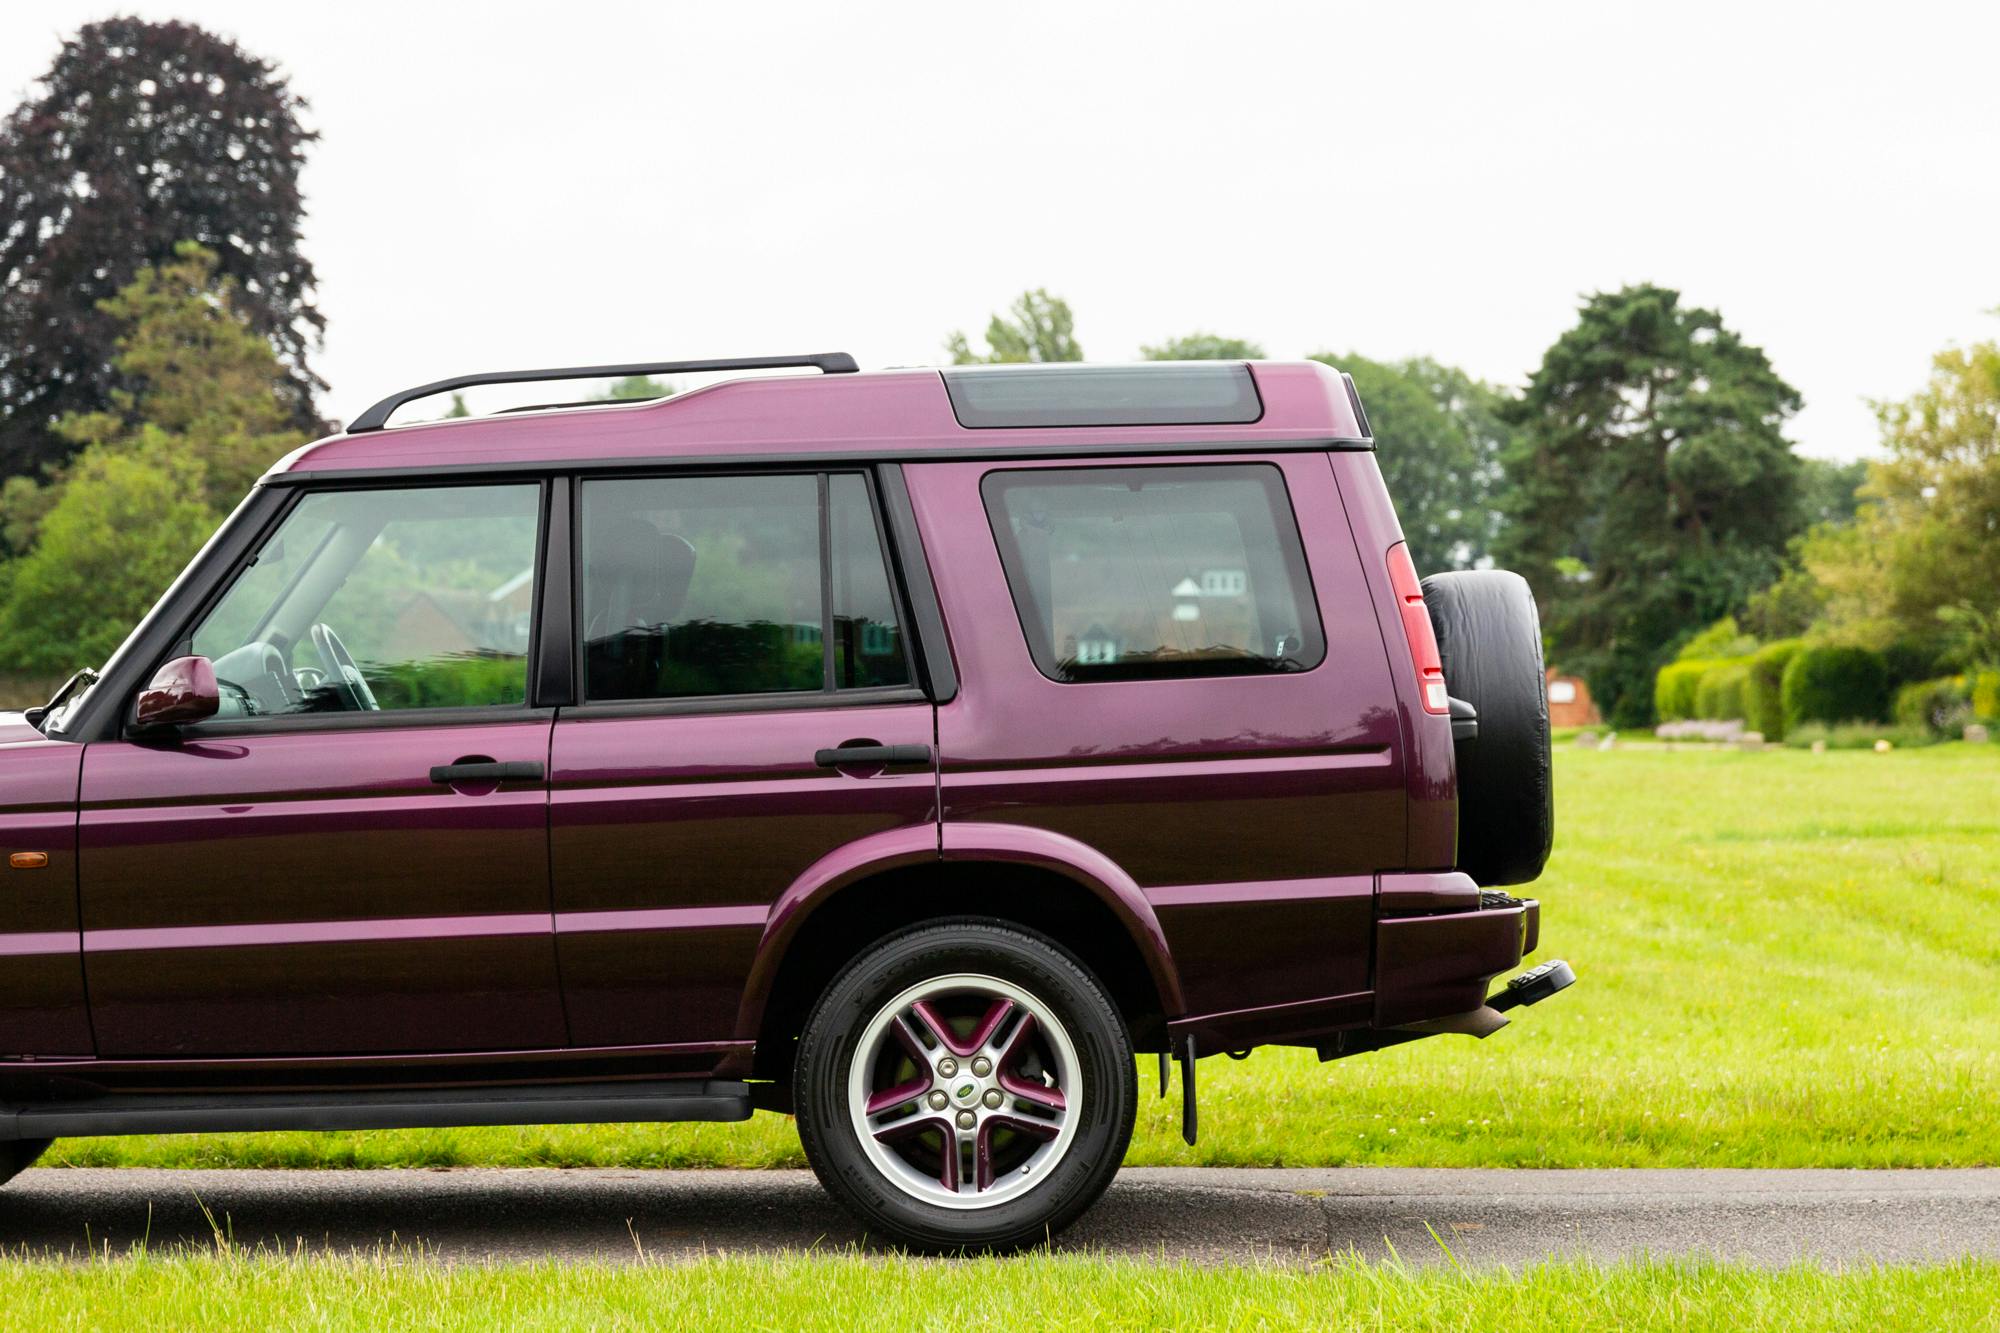 2000 LAND ROVER DISCOVERY 2 V8 AUTOBIOGRAPHY - 1 OF 2